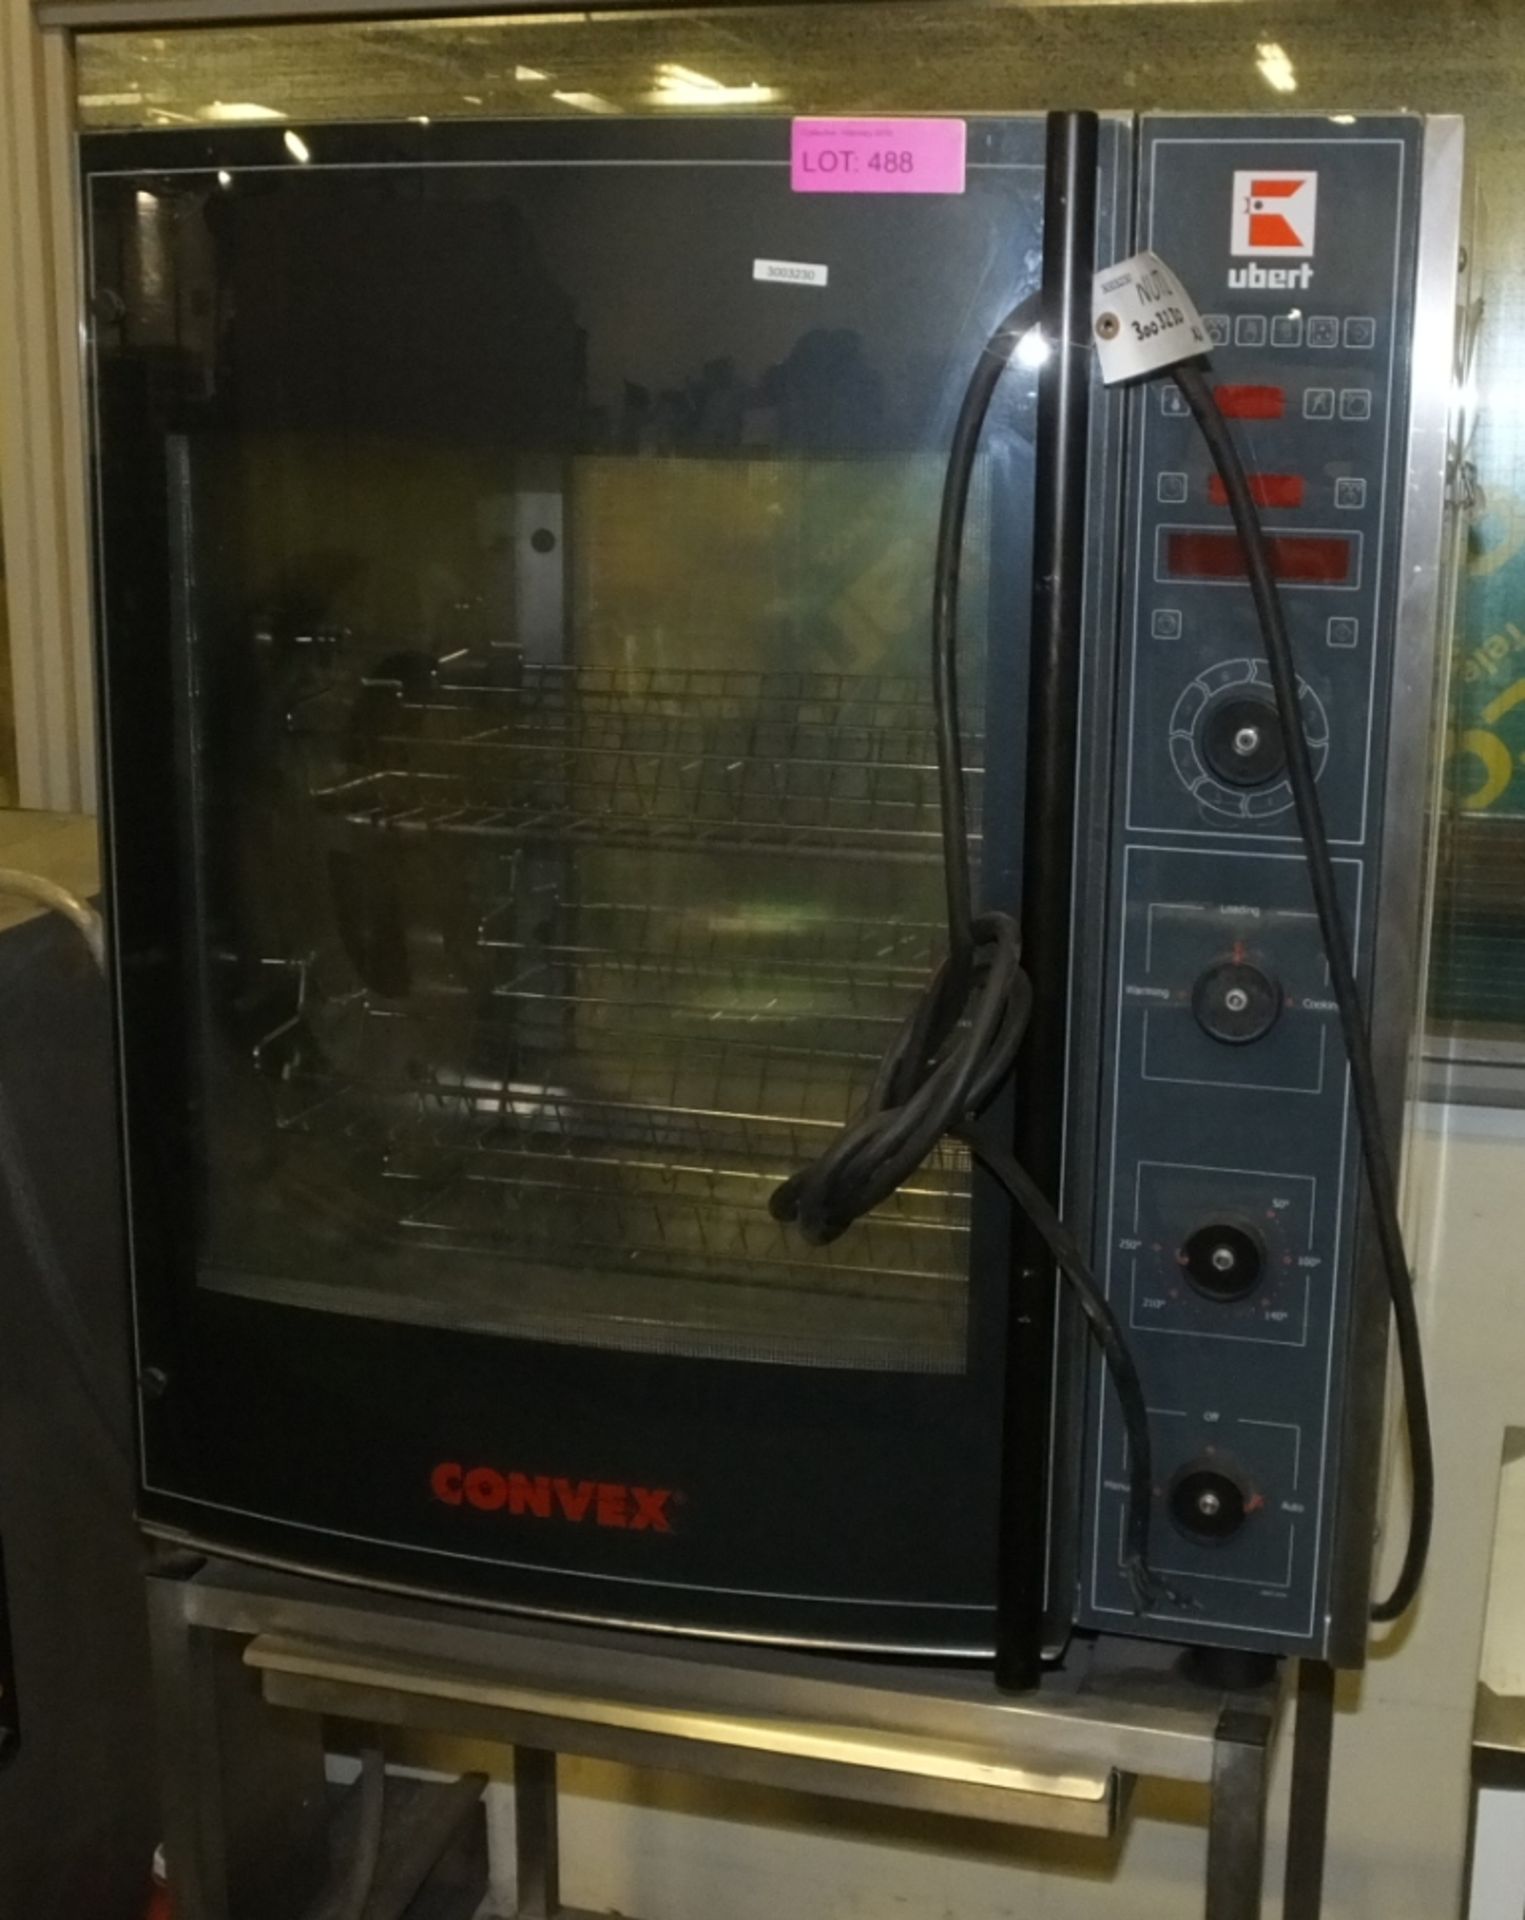 Ubert RT 505 Series Convex oven and stand - 400v 3 Phase